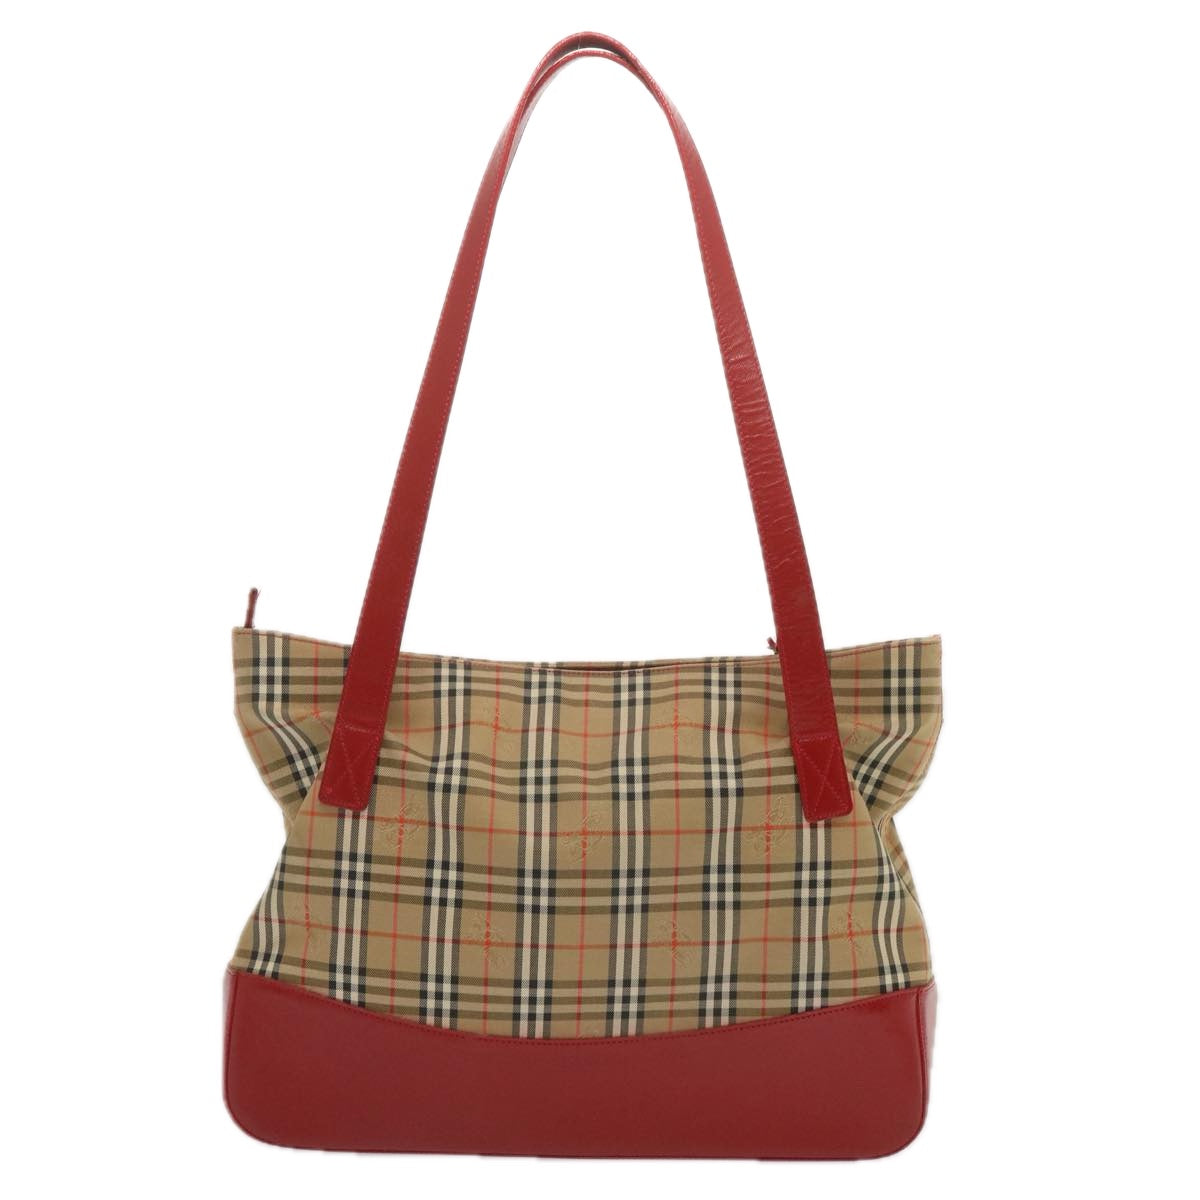 Burberrys Nova Check Tote Bag Canvas Beige Red Auth 68740